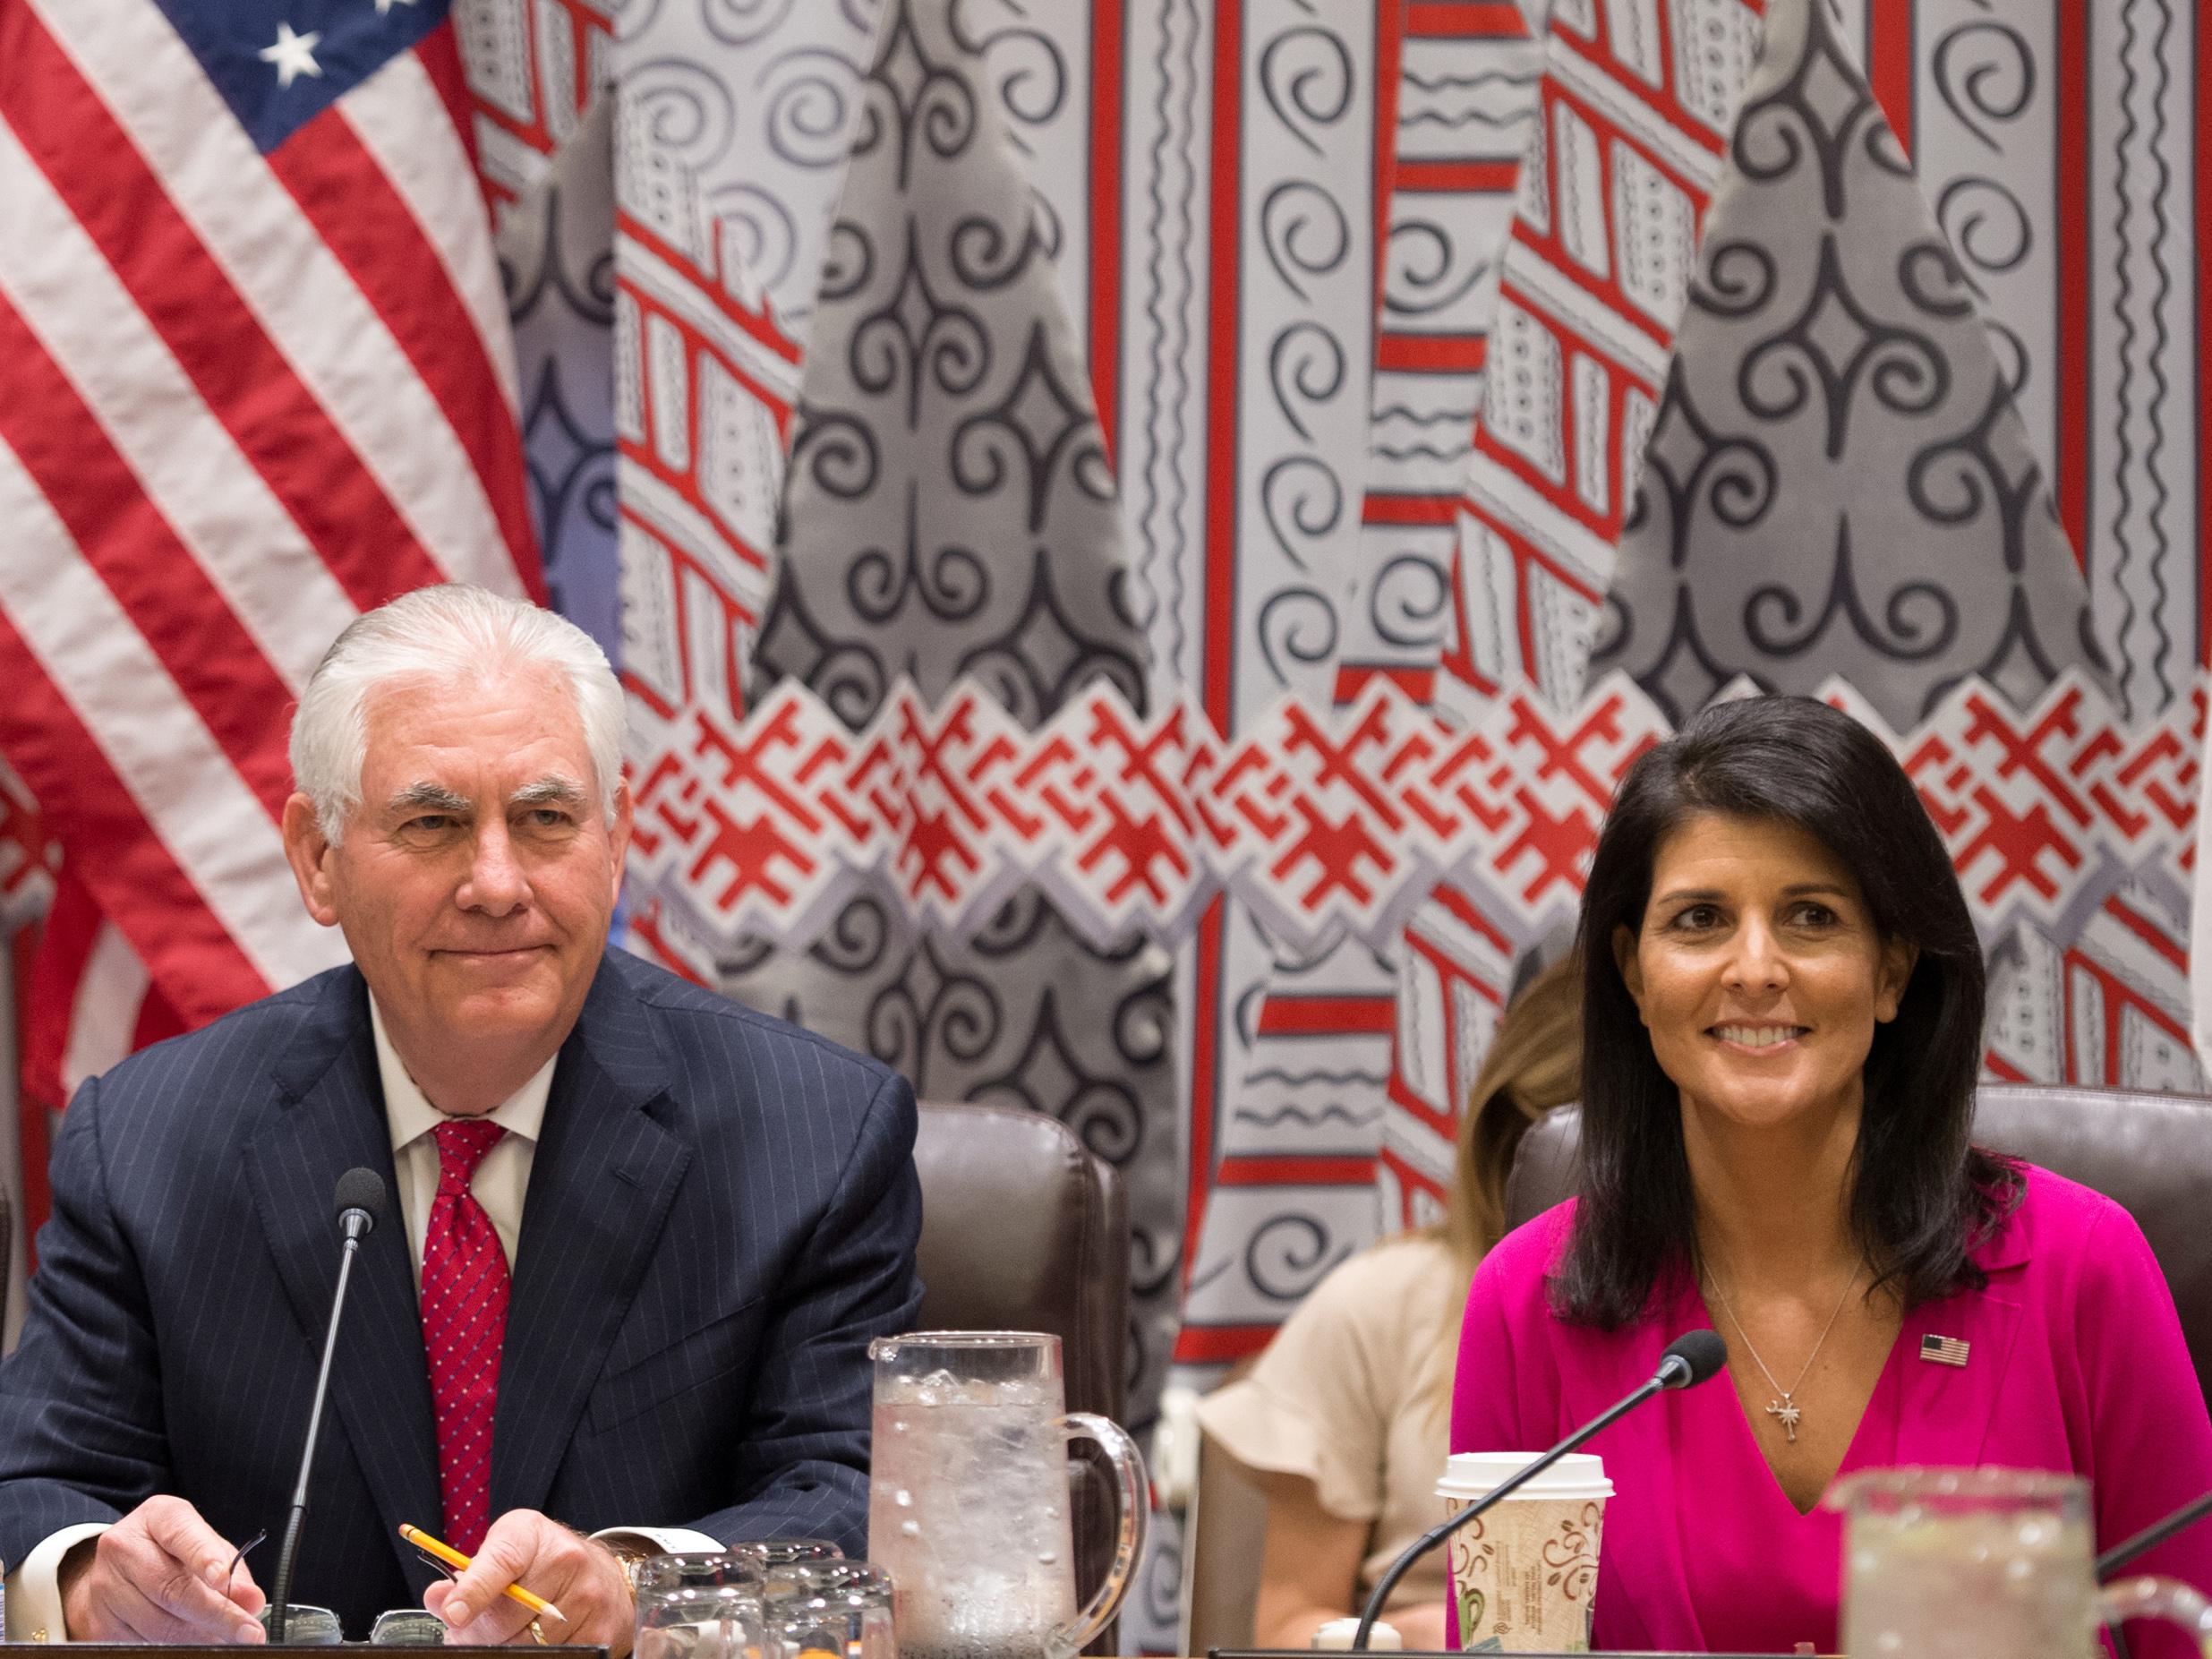 US Secretary of State Rex Tillerson and Ambassador Nikki Haley attend a trilateral meeting with representatives from Japan and South Korea at the United Nations in New York City on 28 April 2017